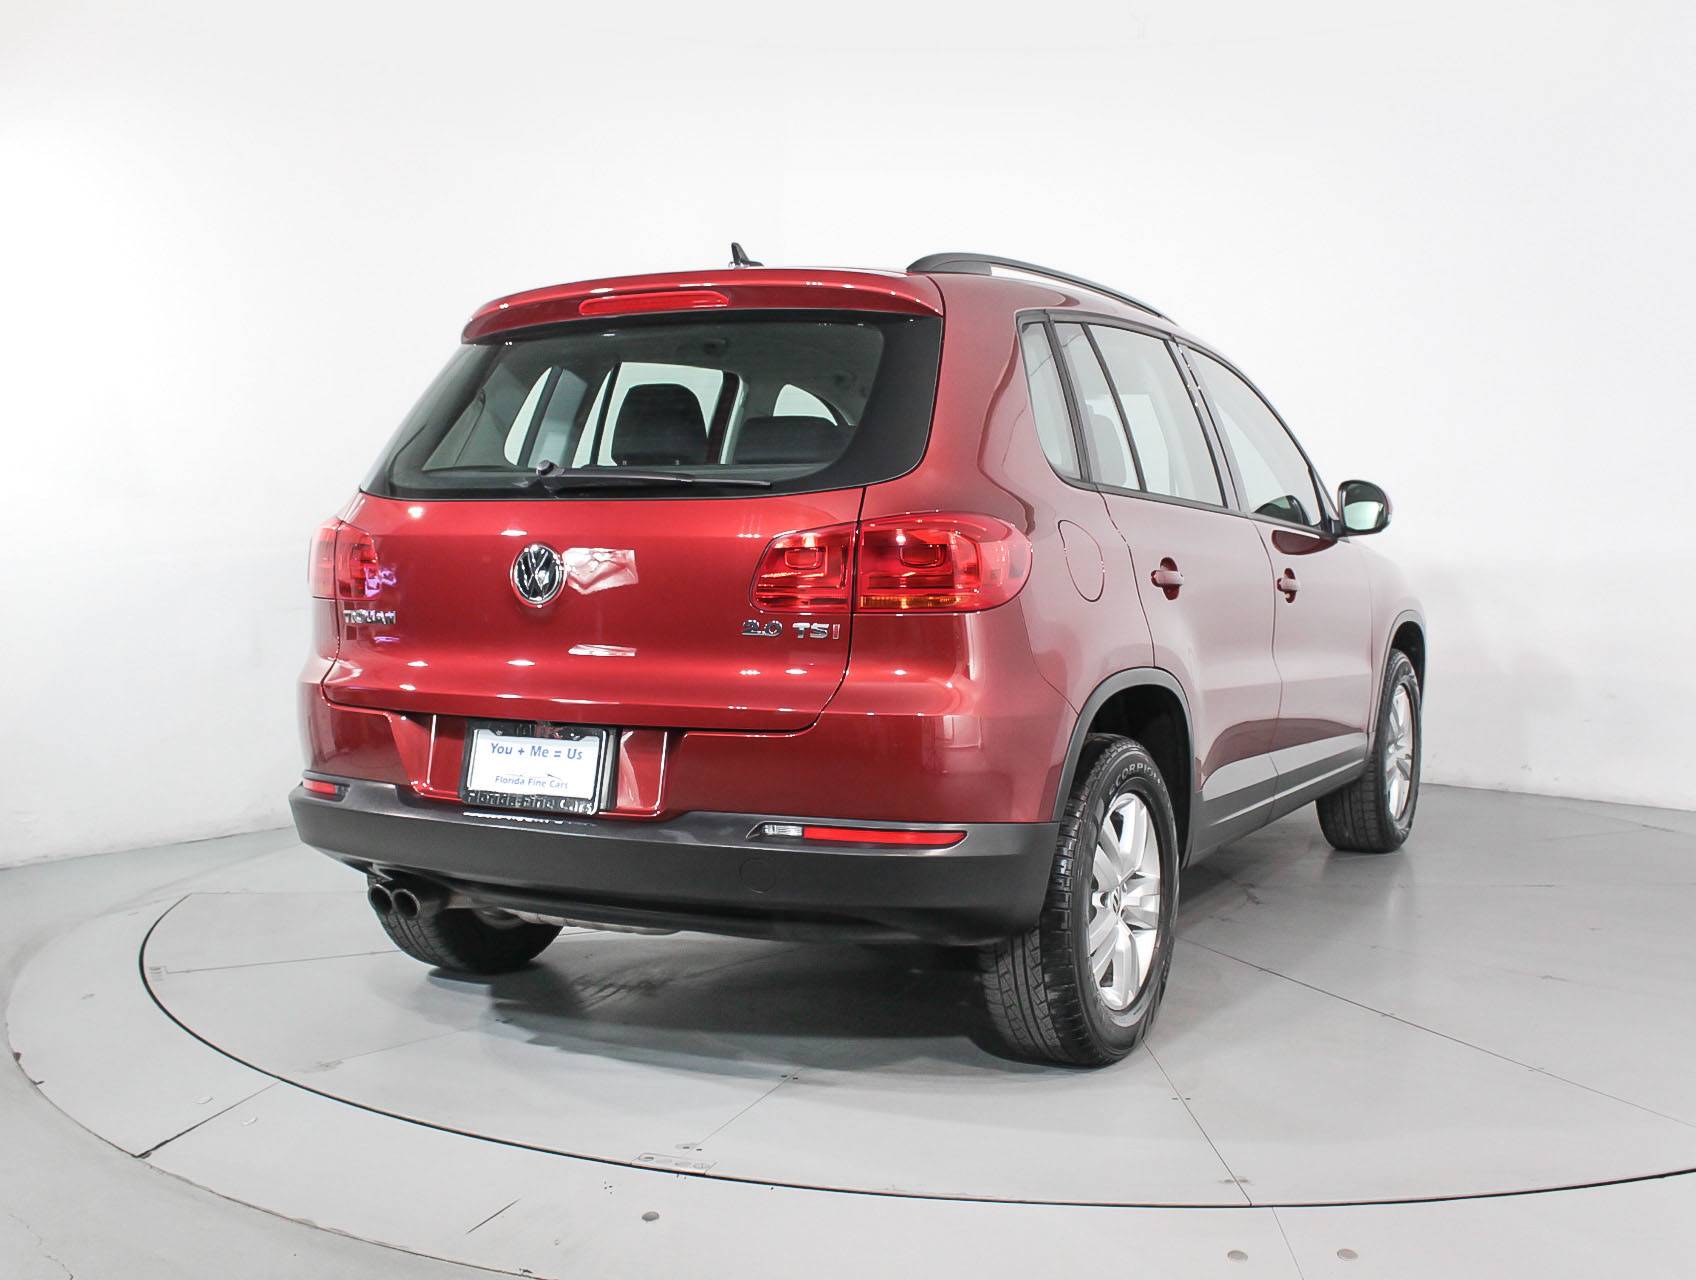 Florida Fine Cars - Used VOLKSWAGEN TIGUAN 2015 HOLLYWOOD S